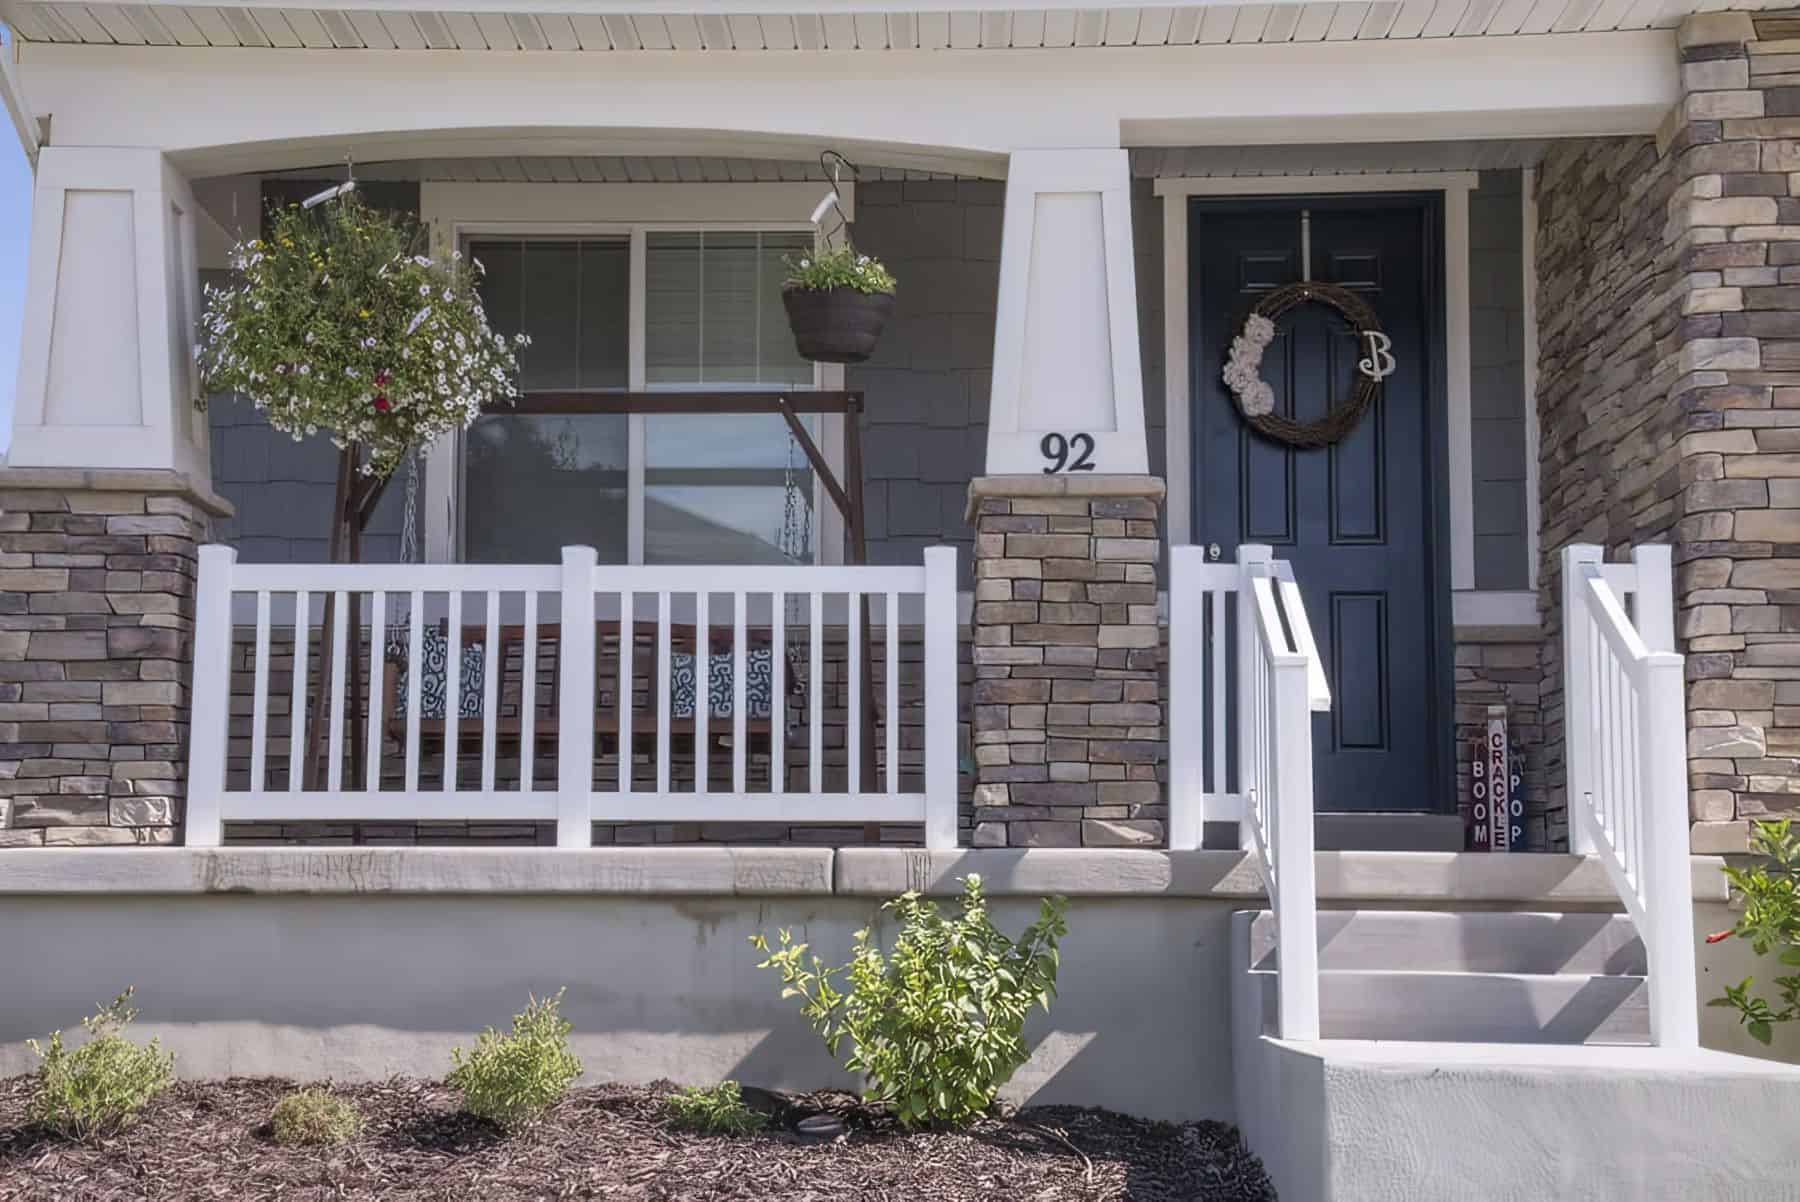 Vinyl rails on small front porch with swing and hanging flowers, and on stairs leading to walkway with small shrubs.